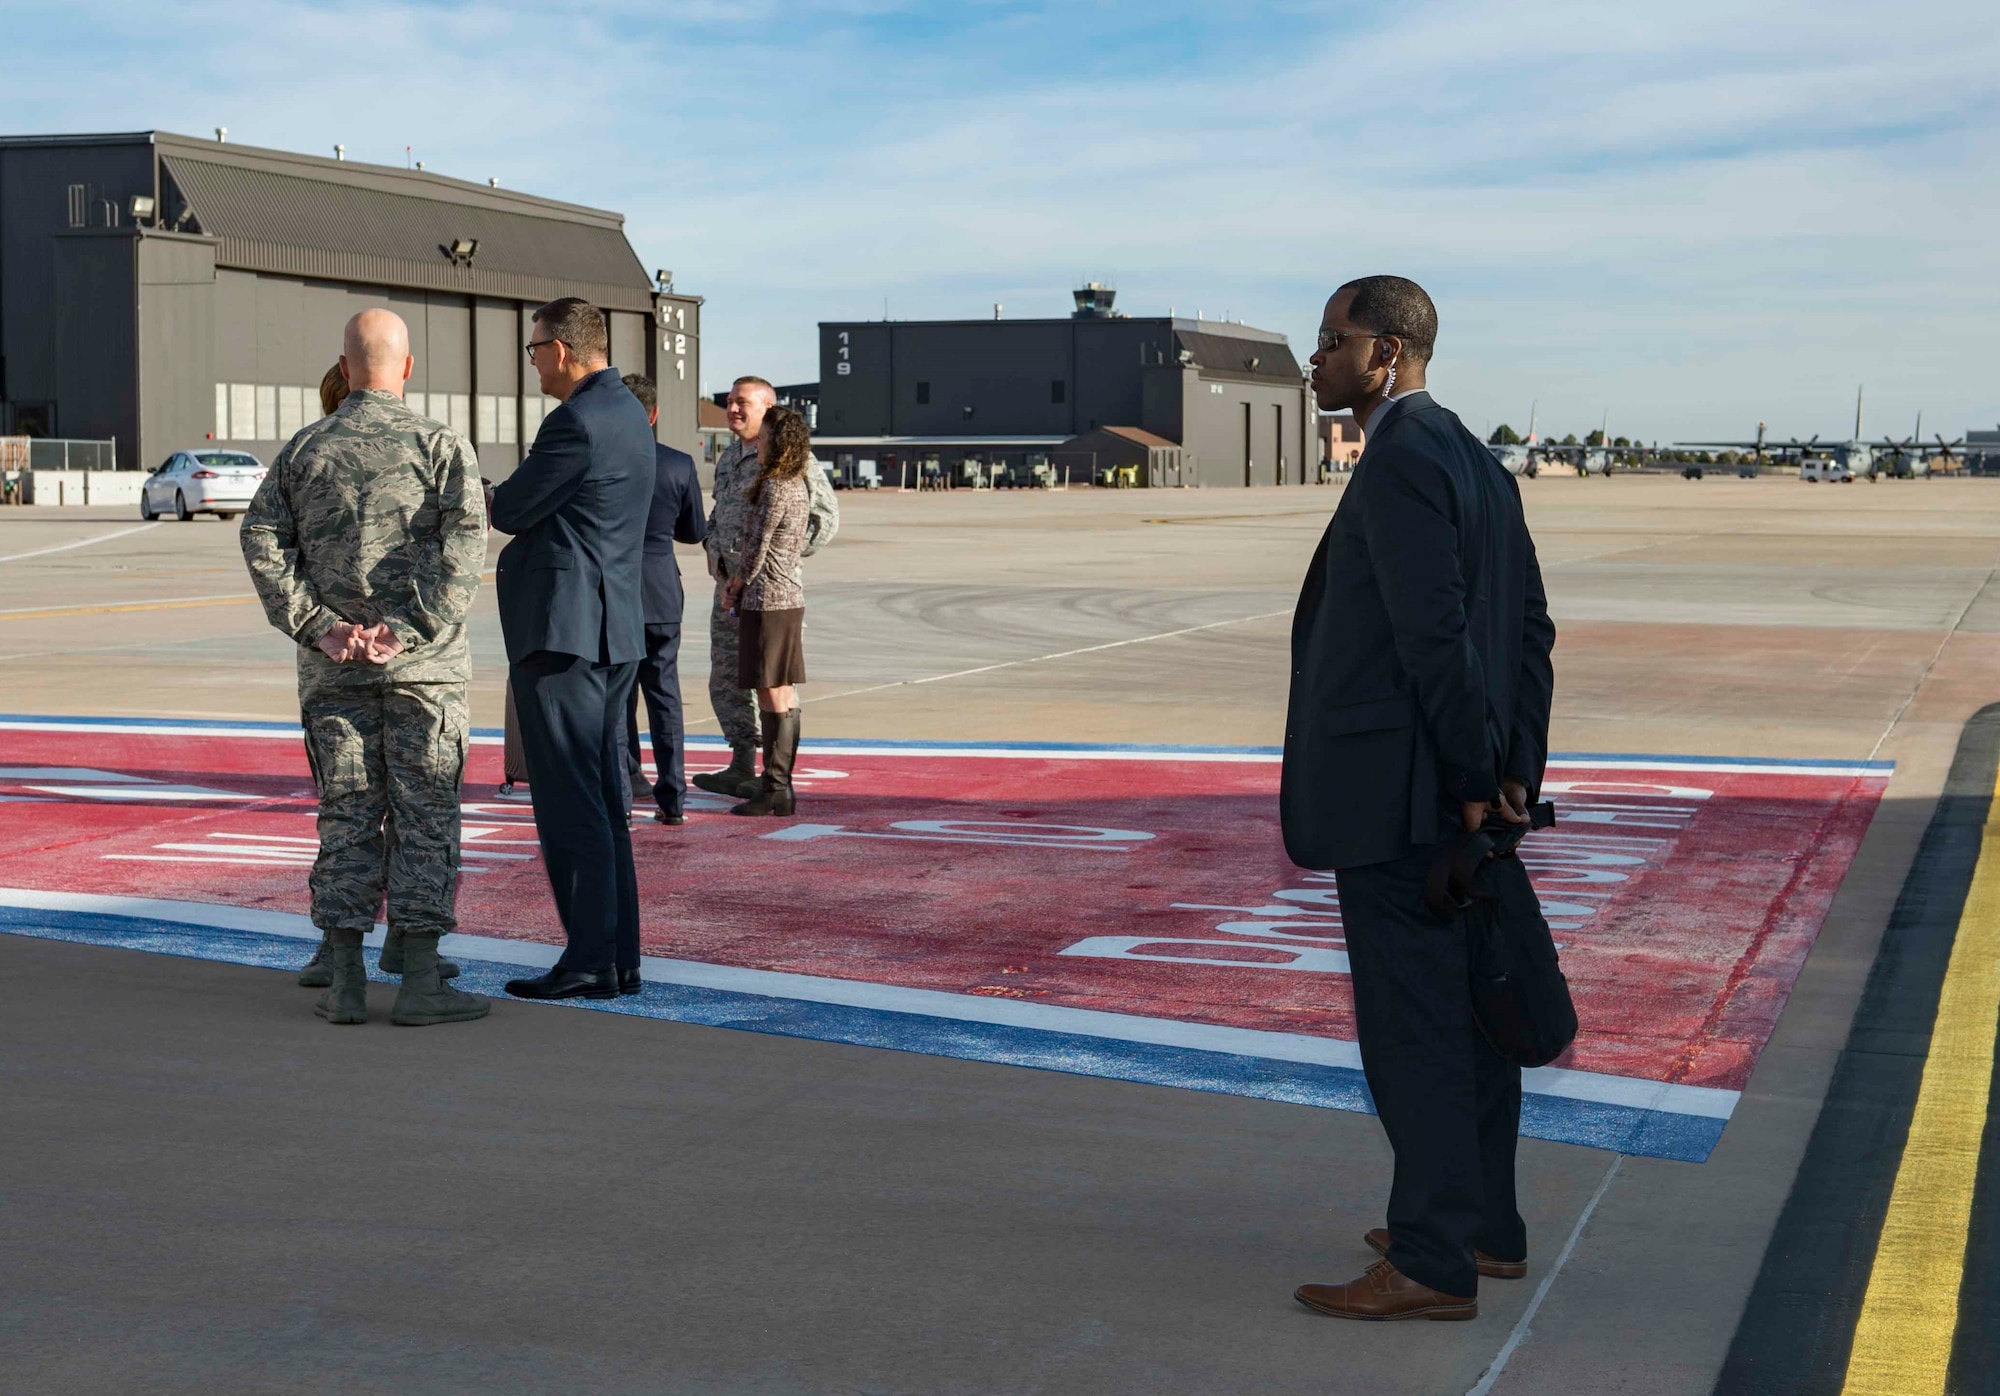 AFOSI SA Donavan Muir stands at the ready at Peterson AFB, Colo., Dec. 3, 2017, as Gen. Lori Robinson, commander of U.S. Northern Command and North American Aerospace Defense Command, Gen. Jay Raymond, AFSC and Joint Force Space Component commander and Col. Eric Dorminey, vice commander of the 21SW, speak with Vice Adm. Ray Griggs, Vice Chief of the Australian Defence Force. SA Muir was part of a Protective Services Operations mission providing security for Griggs. (U.S. Air Force photo by Dave Grim)